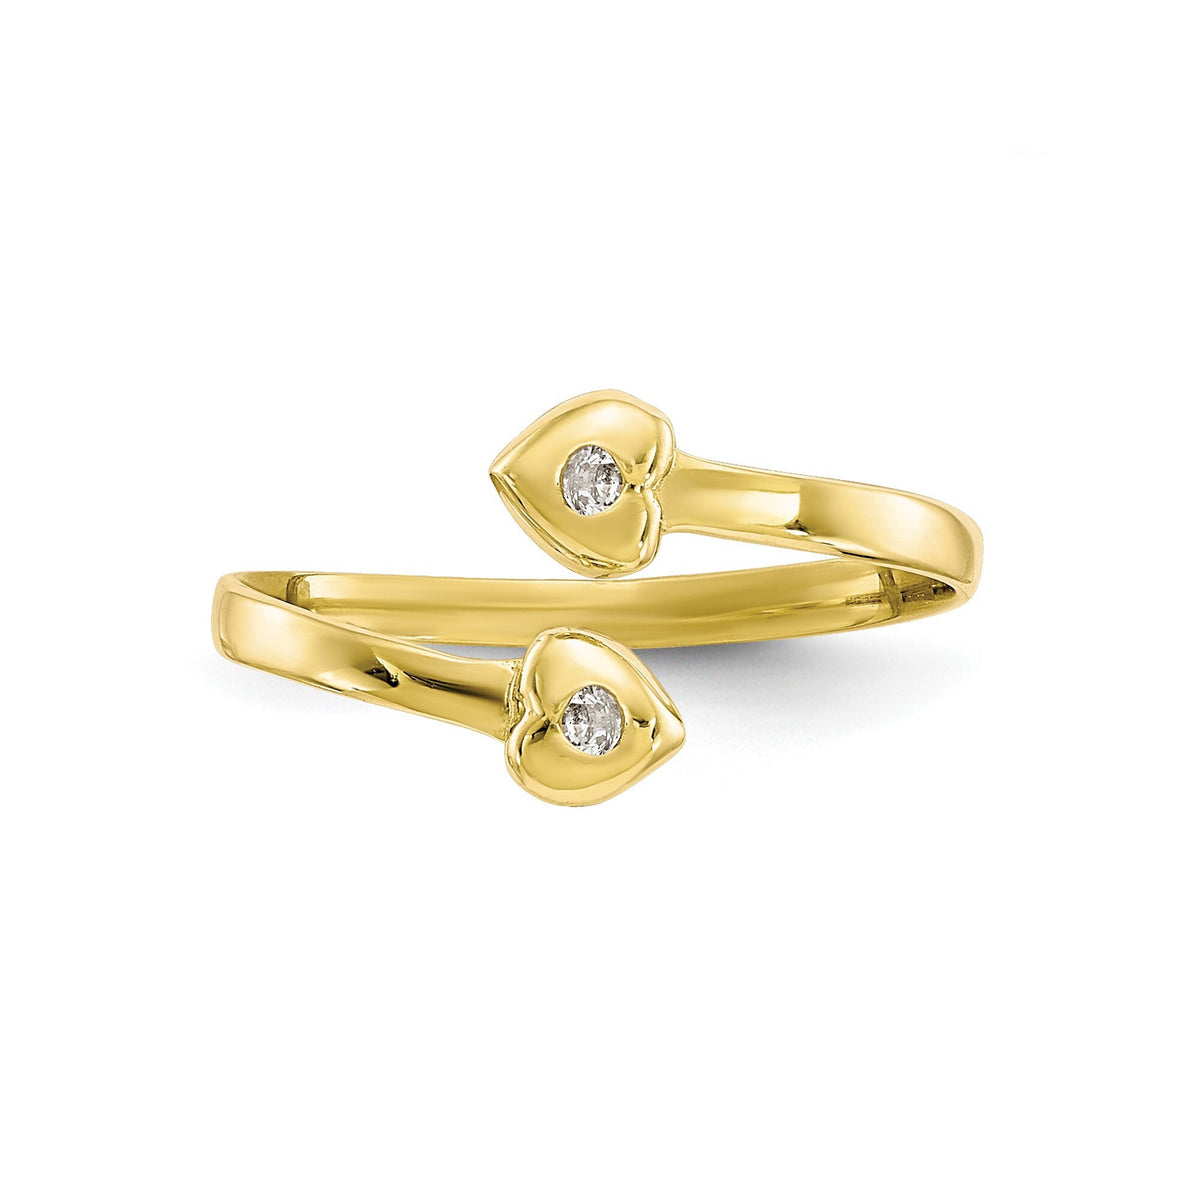 10k Yellow Gold & CZ Double Heart Solid Toe Ring - Gift Box Included - Made in USA